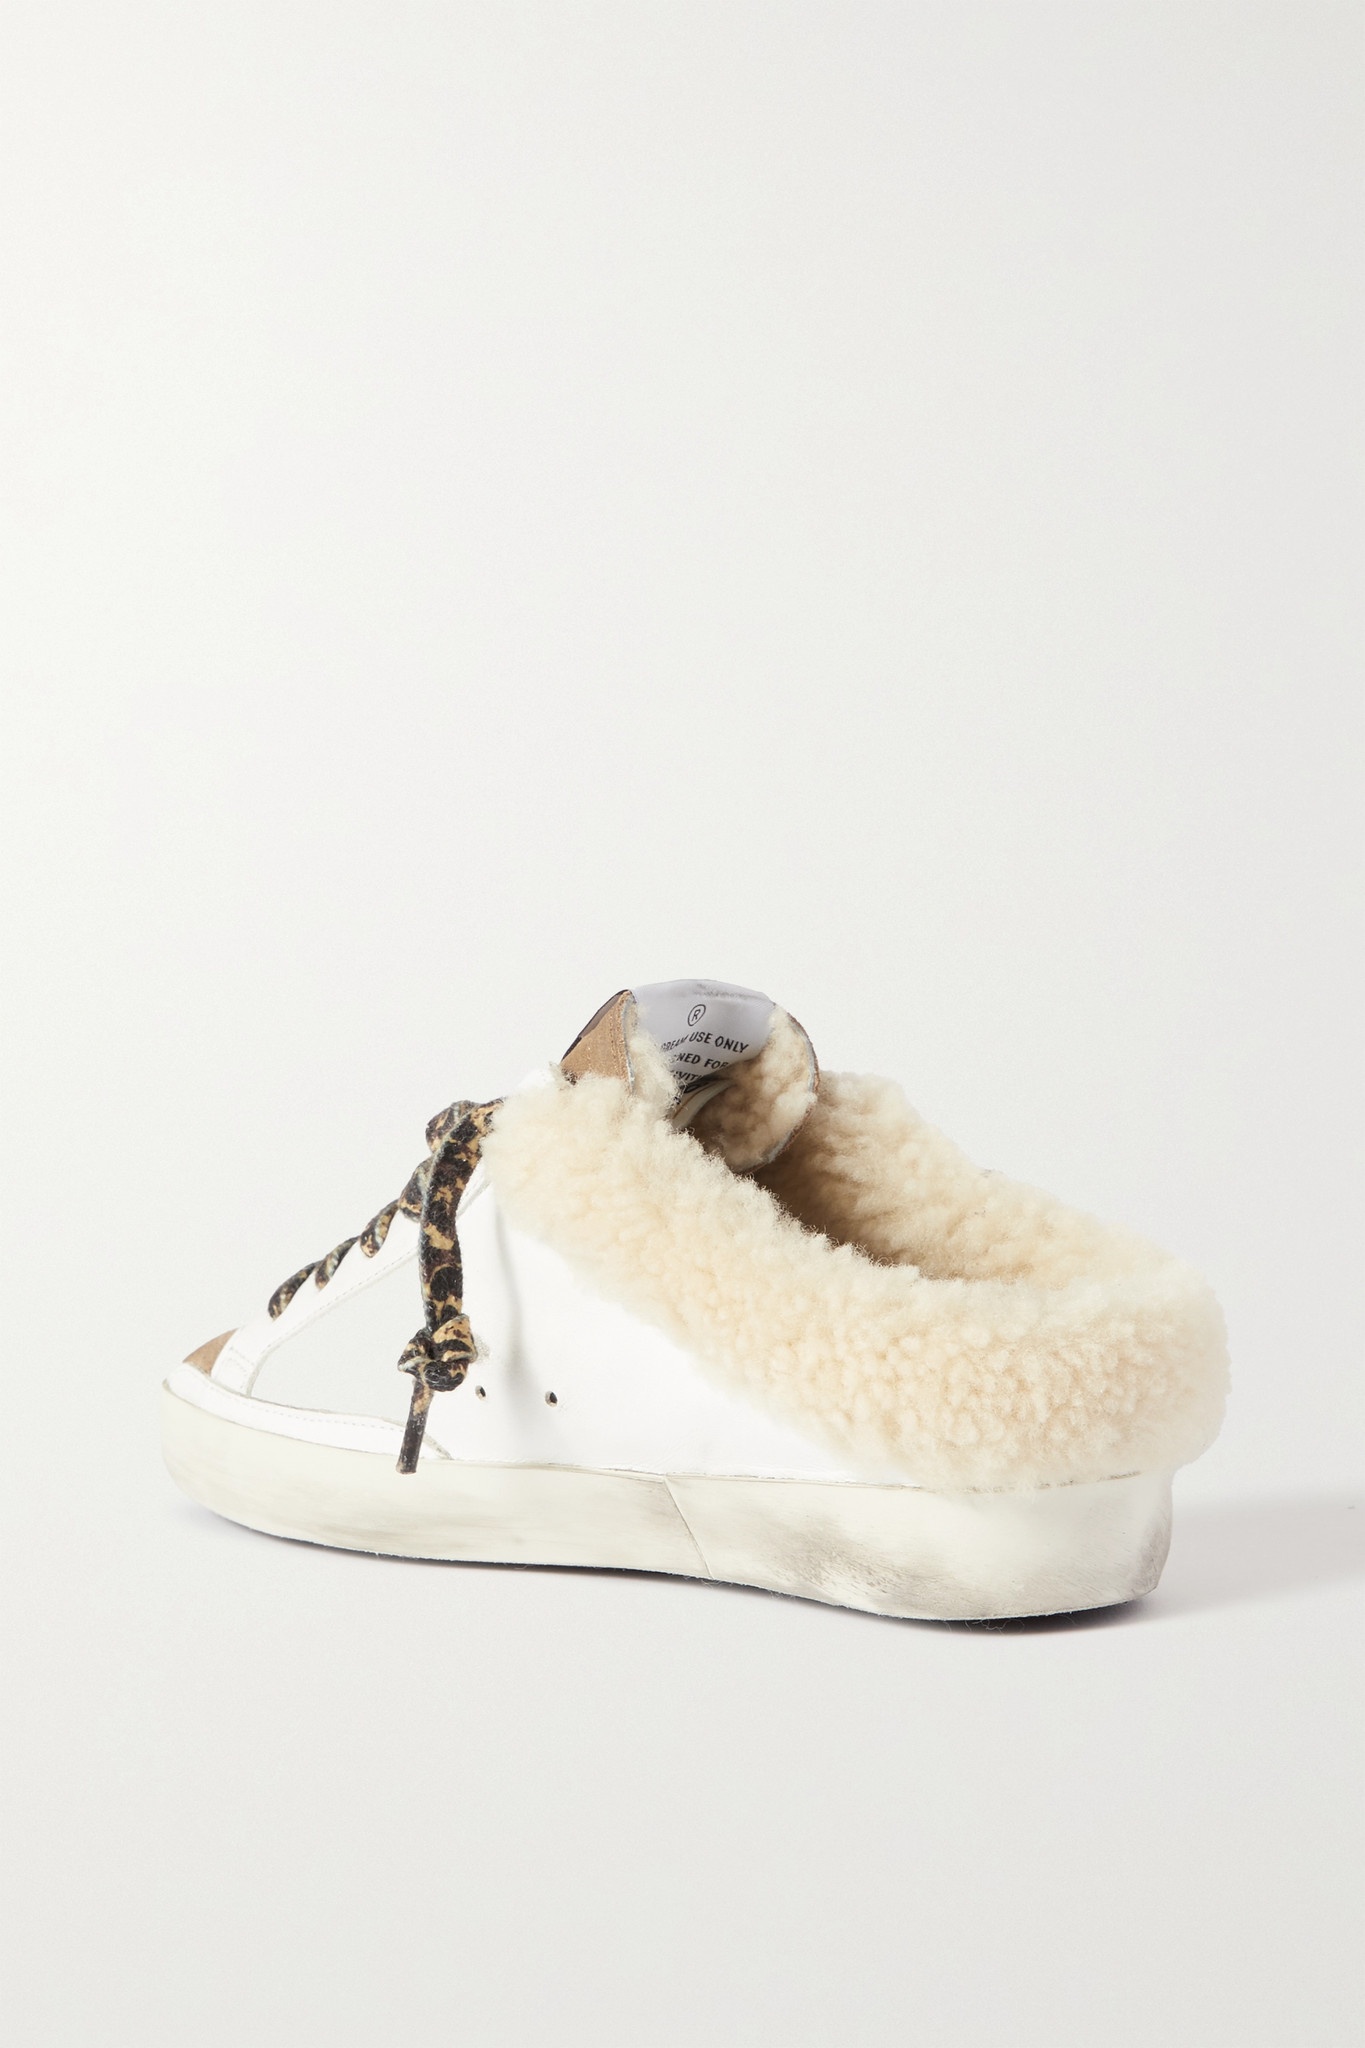 Superstar Sabot shearling-lined distressed glittered leather slip-on sneakers - 3